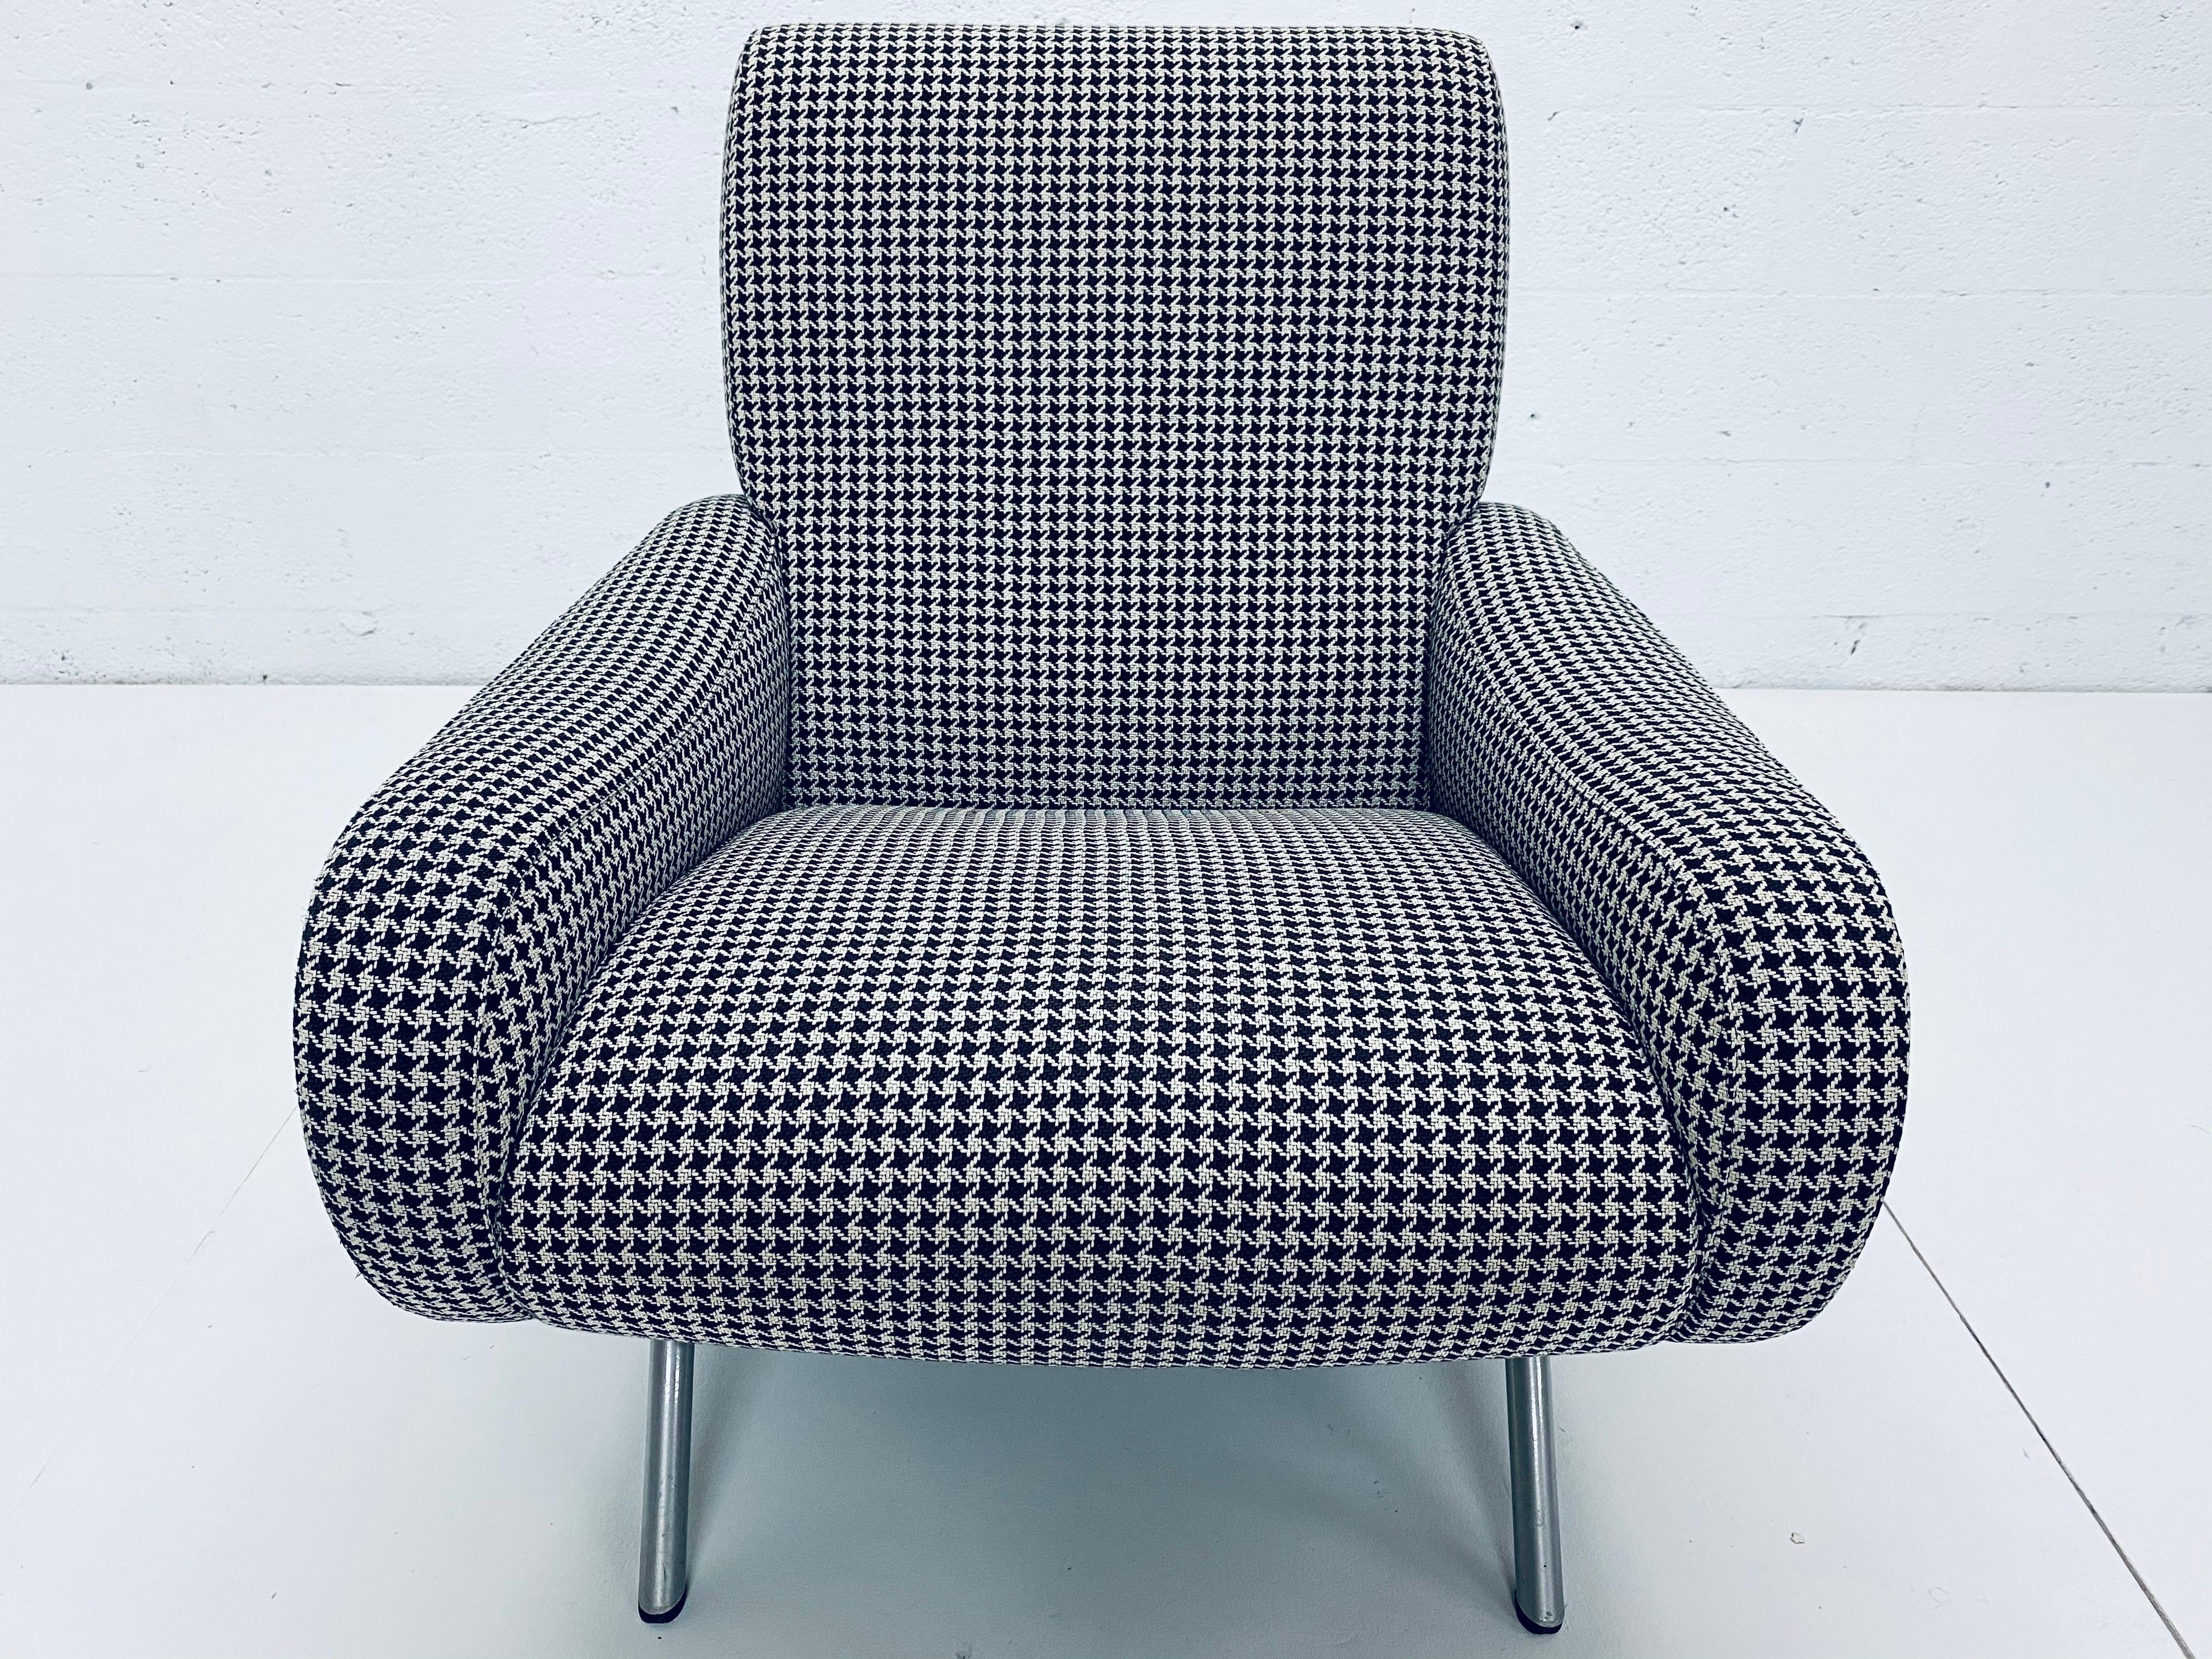 Marco Zanuso 720 lady chair by Arflex. Fabric is original and in excellent condition for age and use.

Marco Zanuso's 720 lady chair was awarded the Gold Medal at the 1951 Milan Triennale and rapidly achieved the status of a modern design icon.